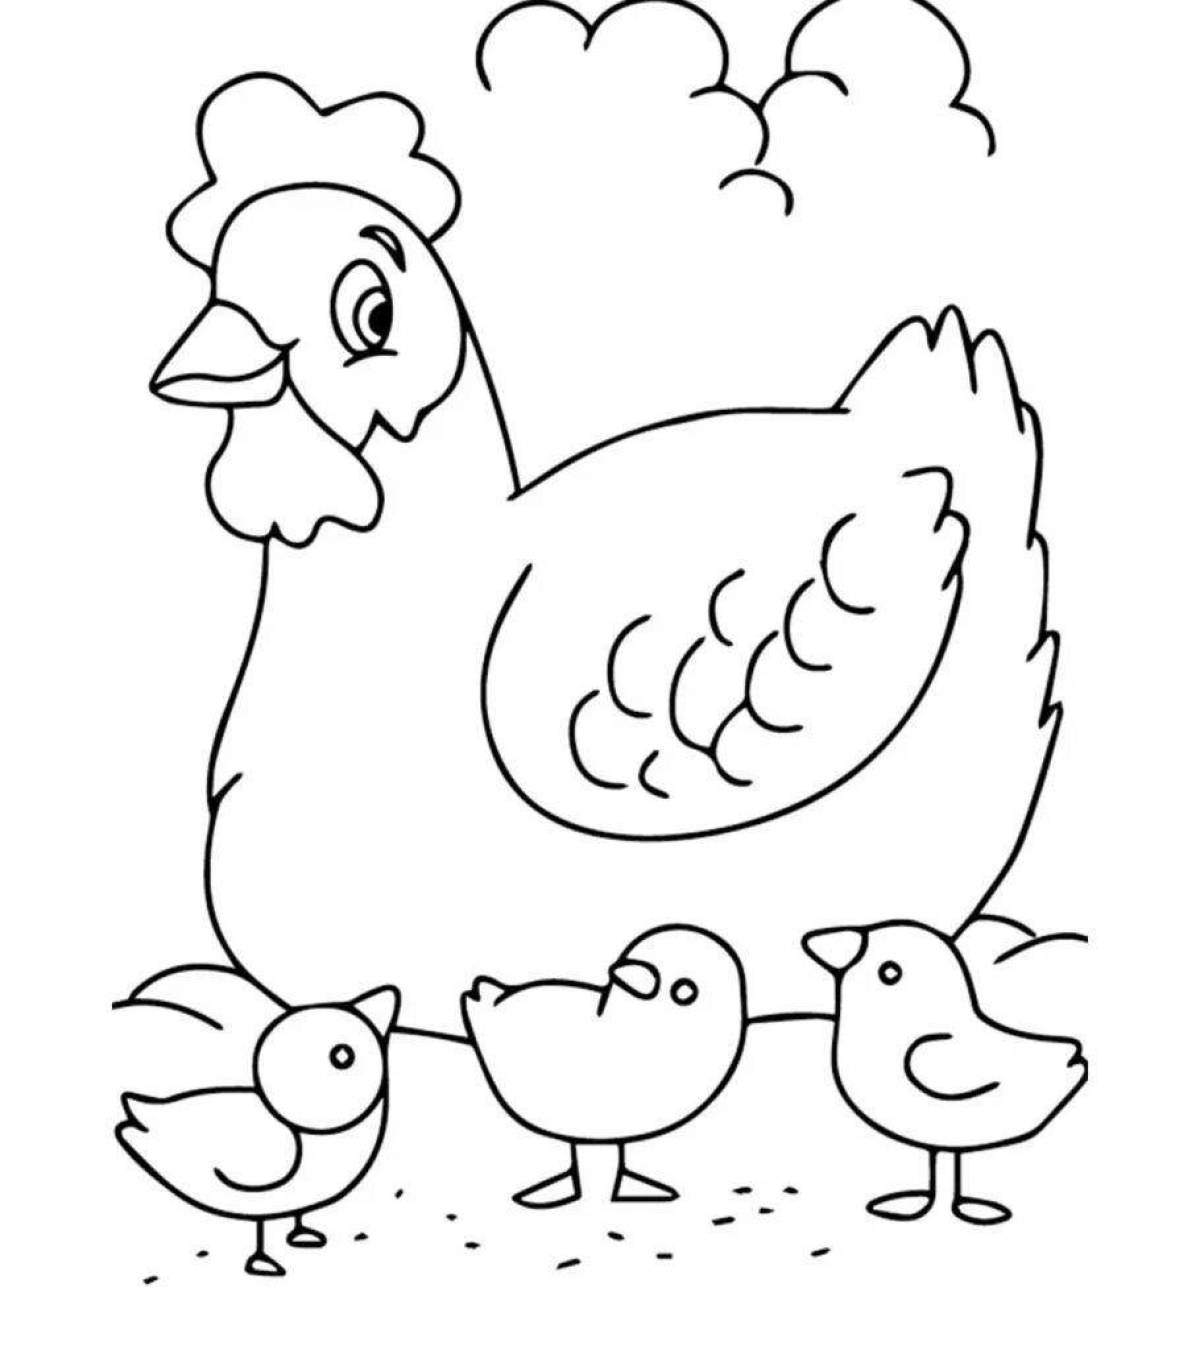 Chicken creative coloring for kids